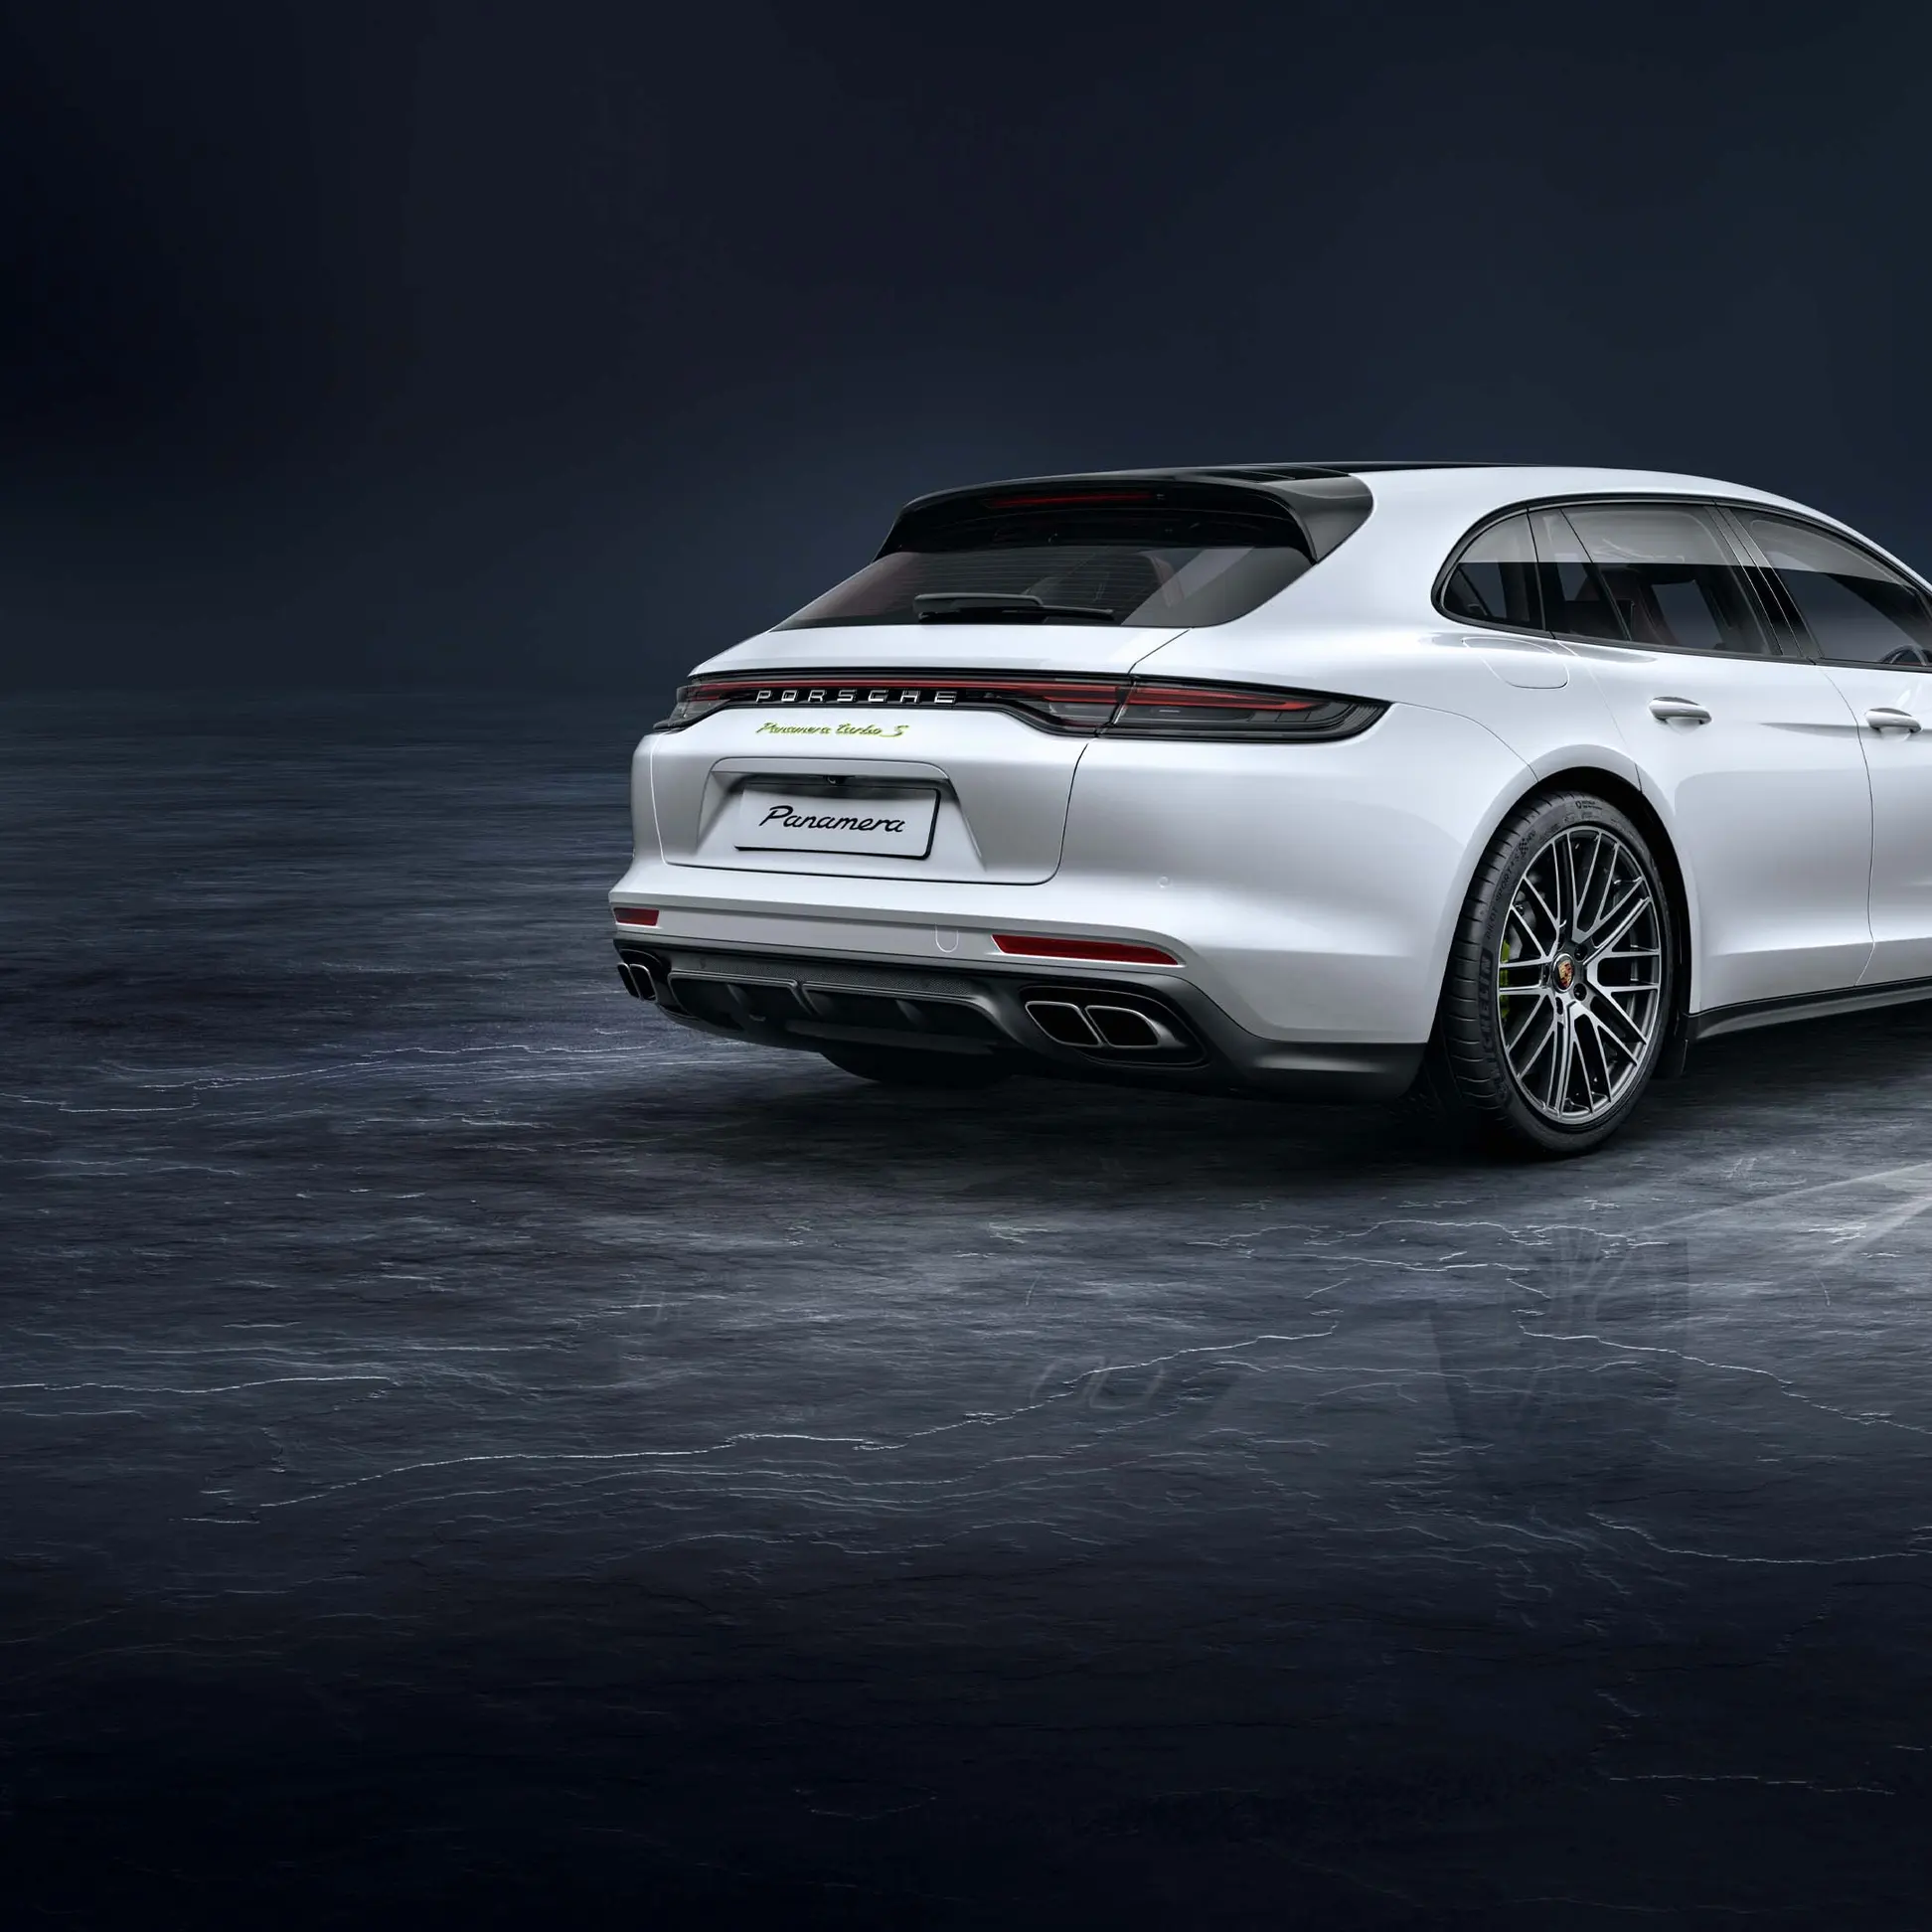 Porsche Panamera S: The sports car for the family!